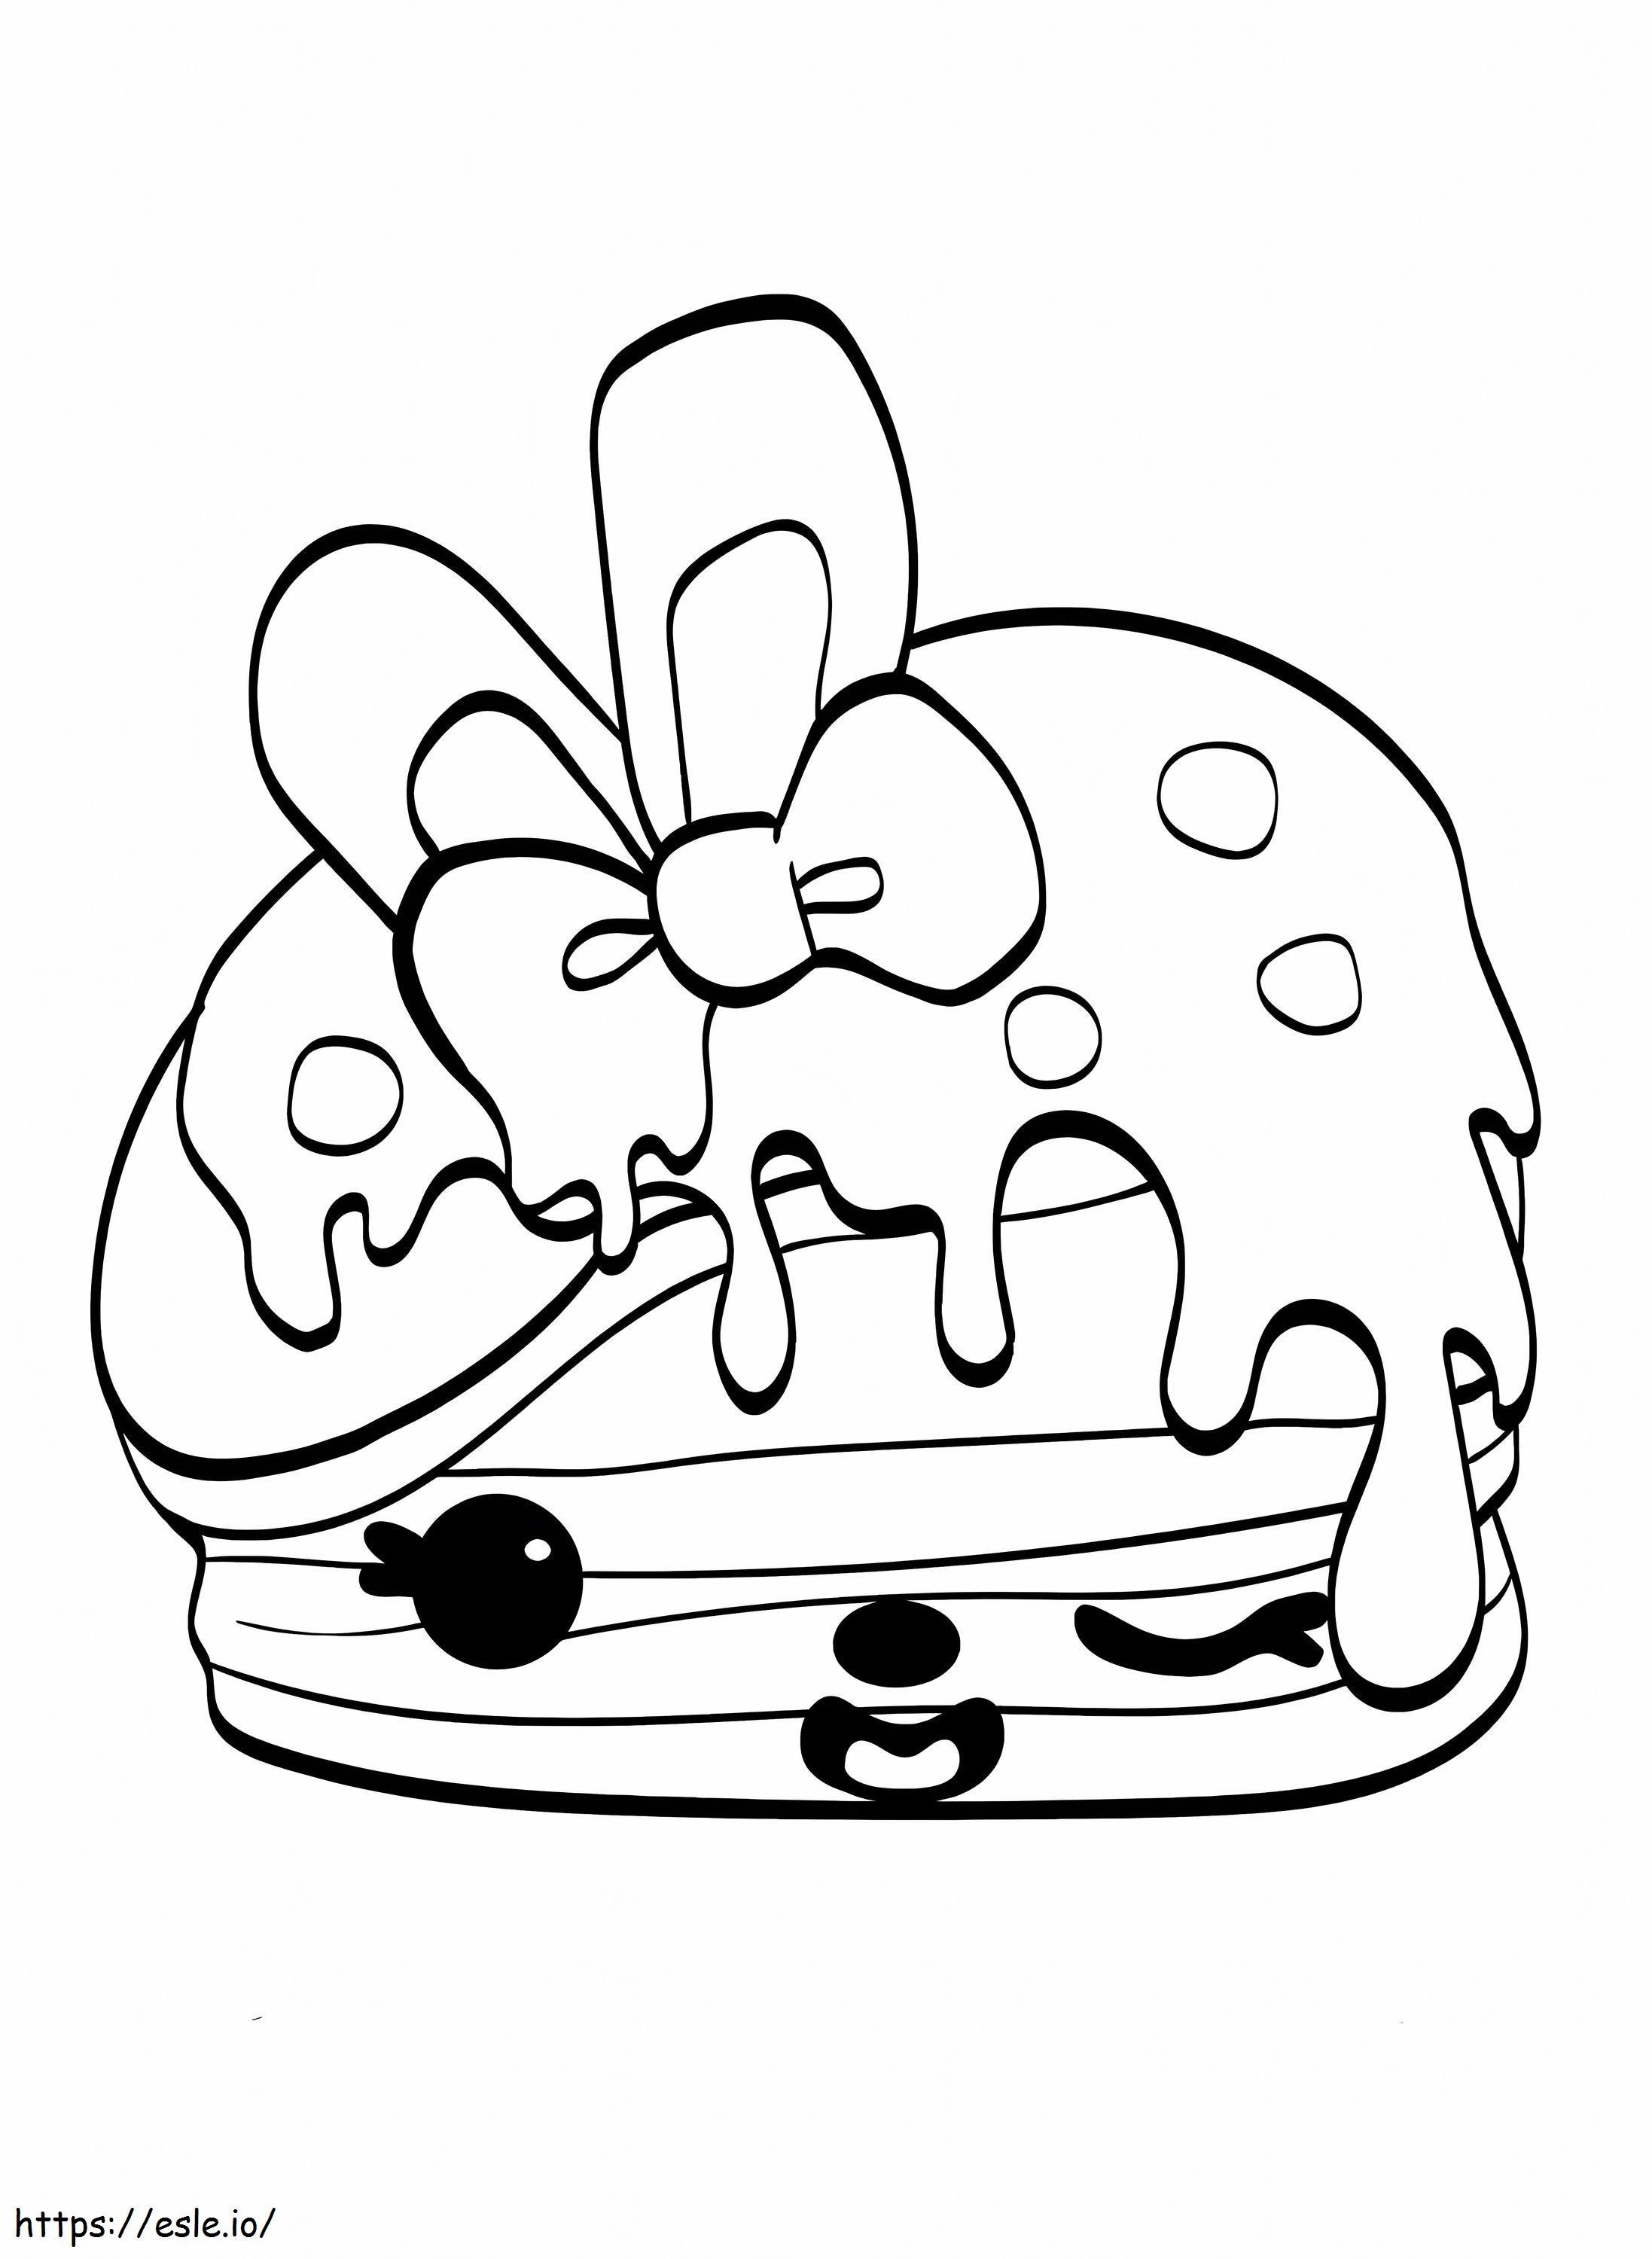 Berry Cakes coloring page